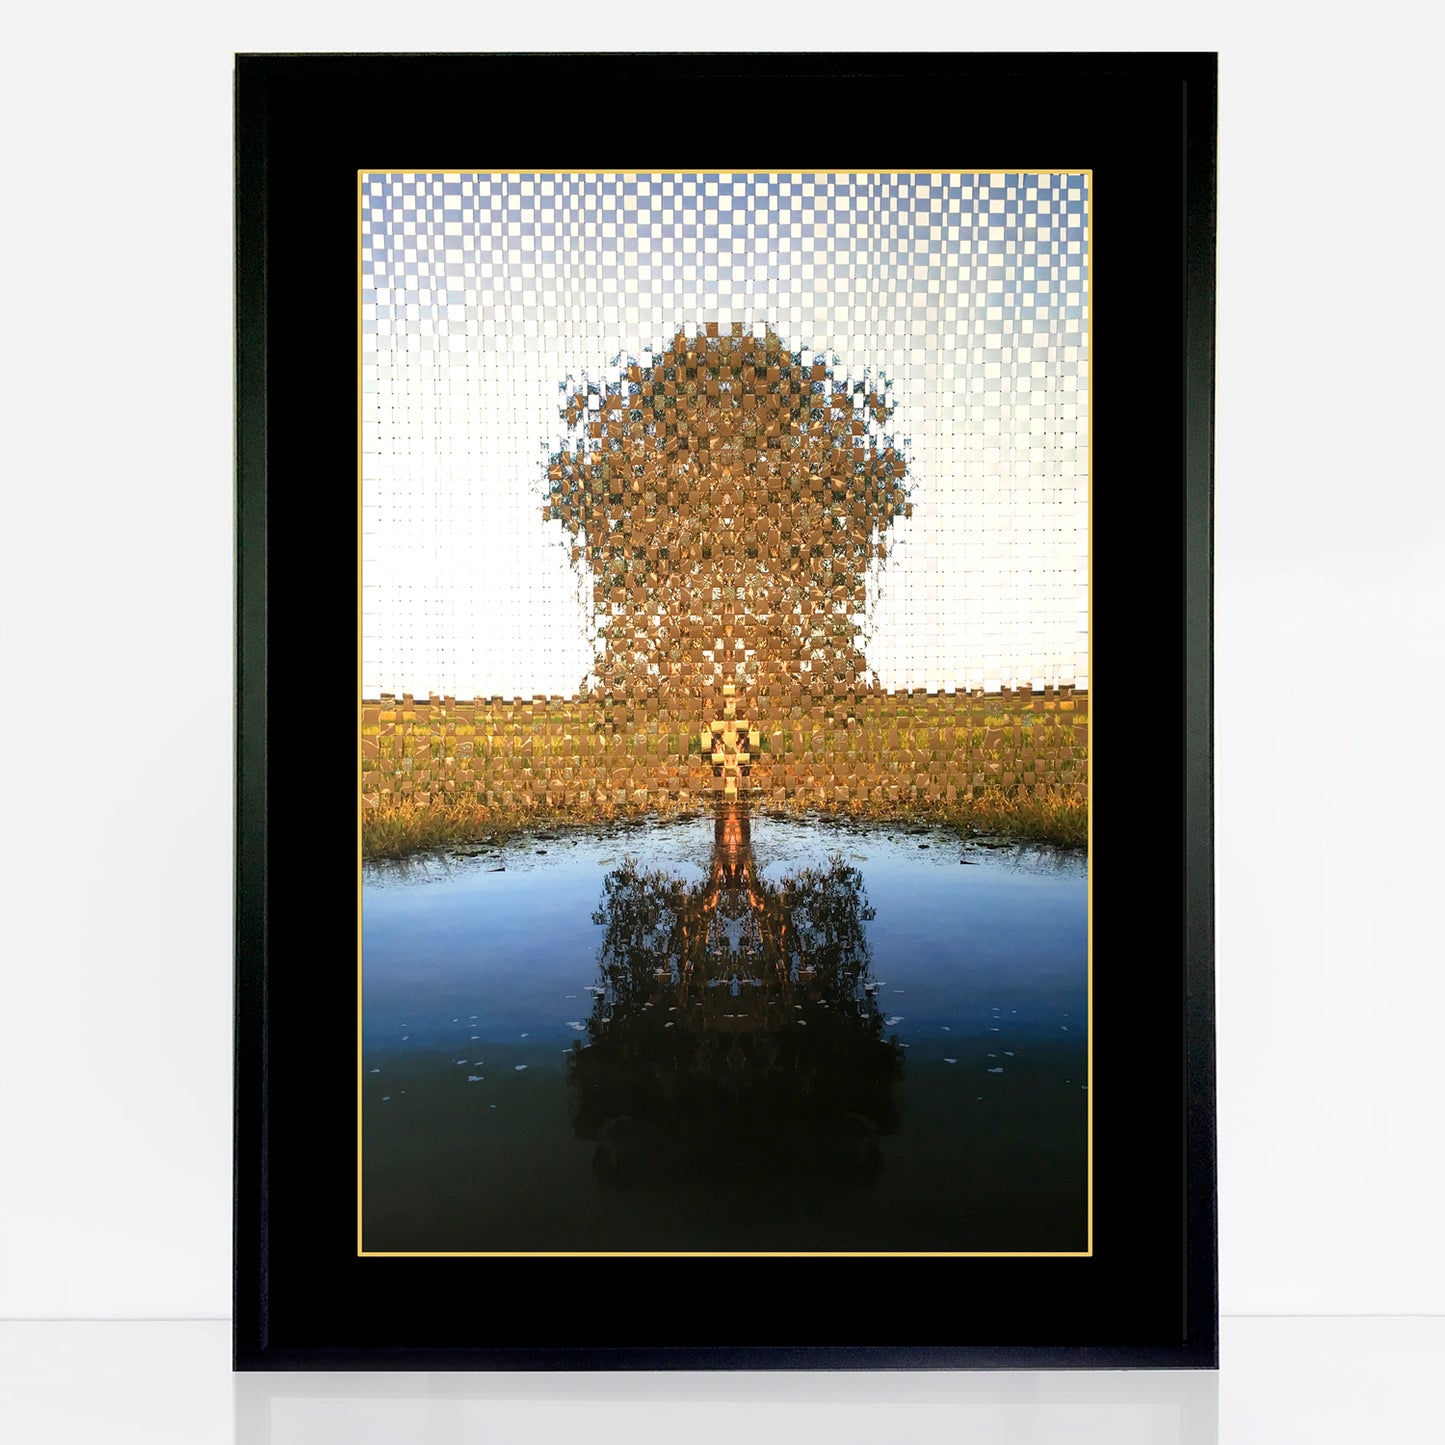 solitary gum tree stands on the bank of a river. The top half of the image has been woven with post consumer recycled paper with bits of gold and sparkling green paint running through the pattern